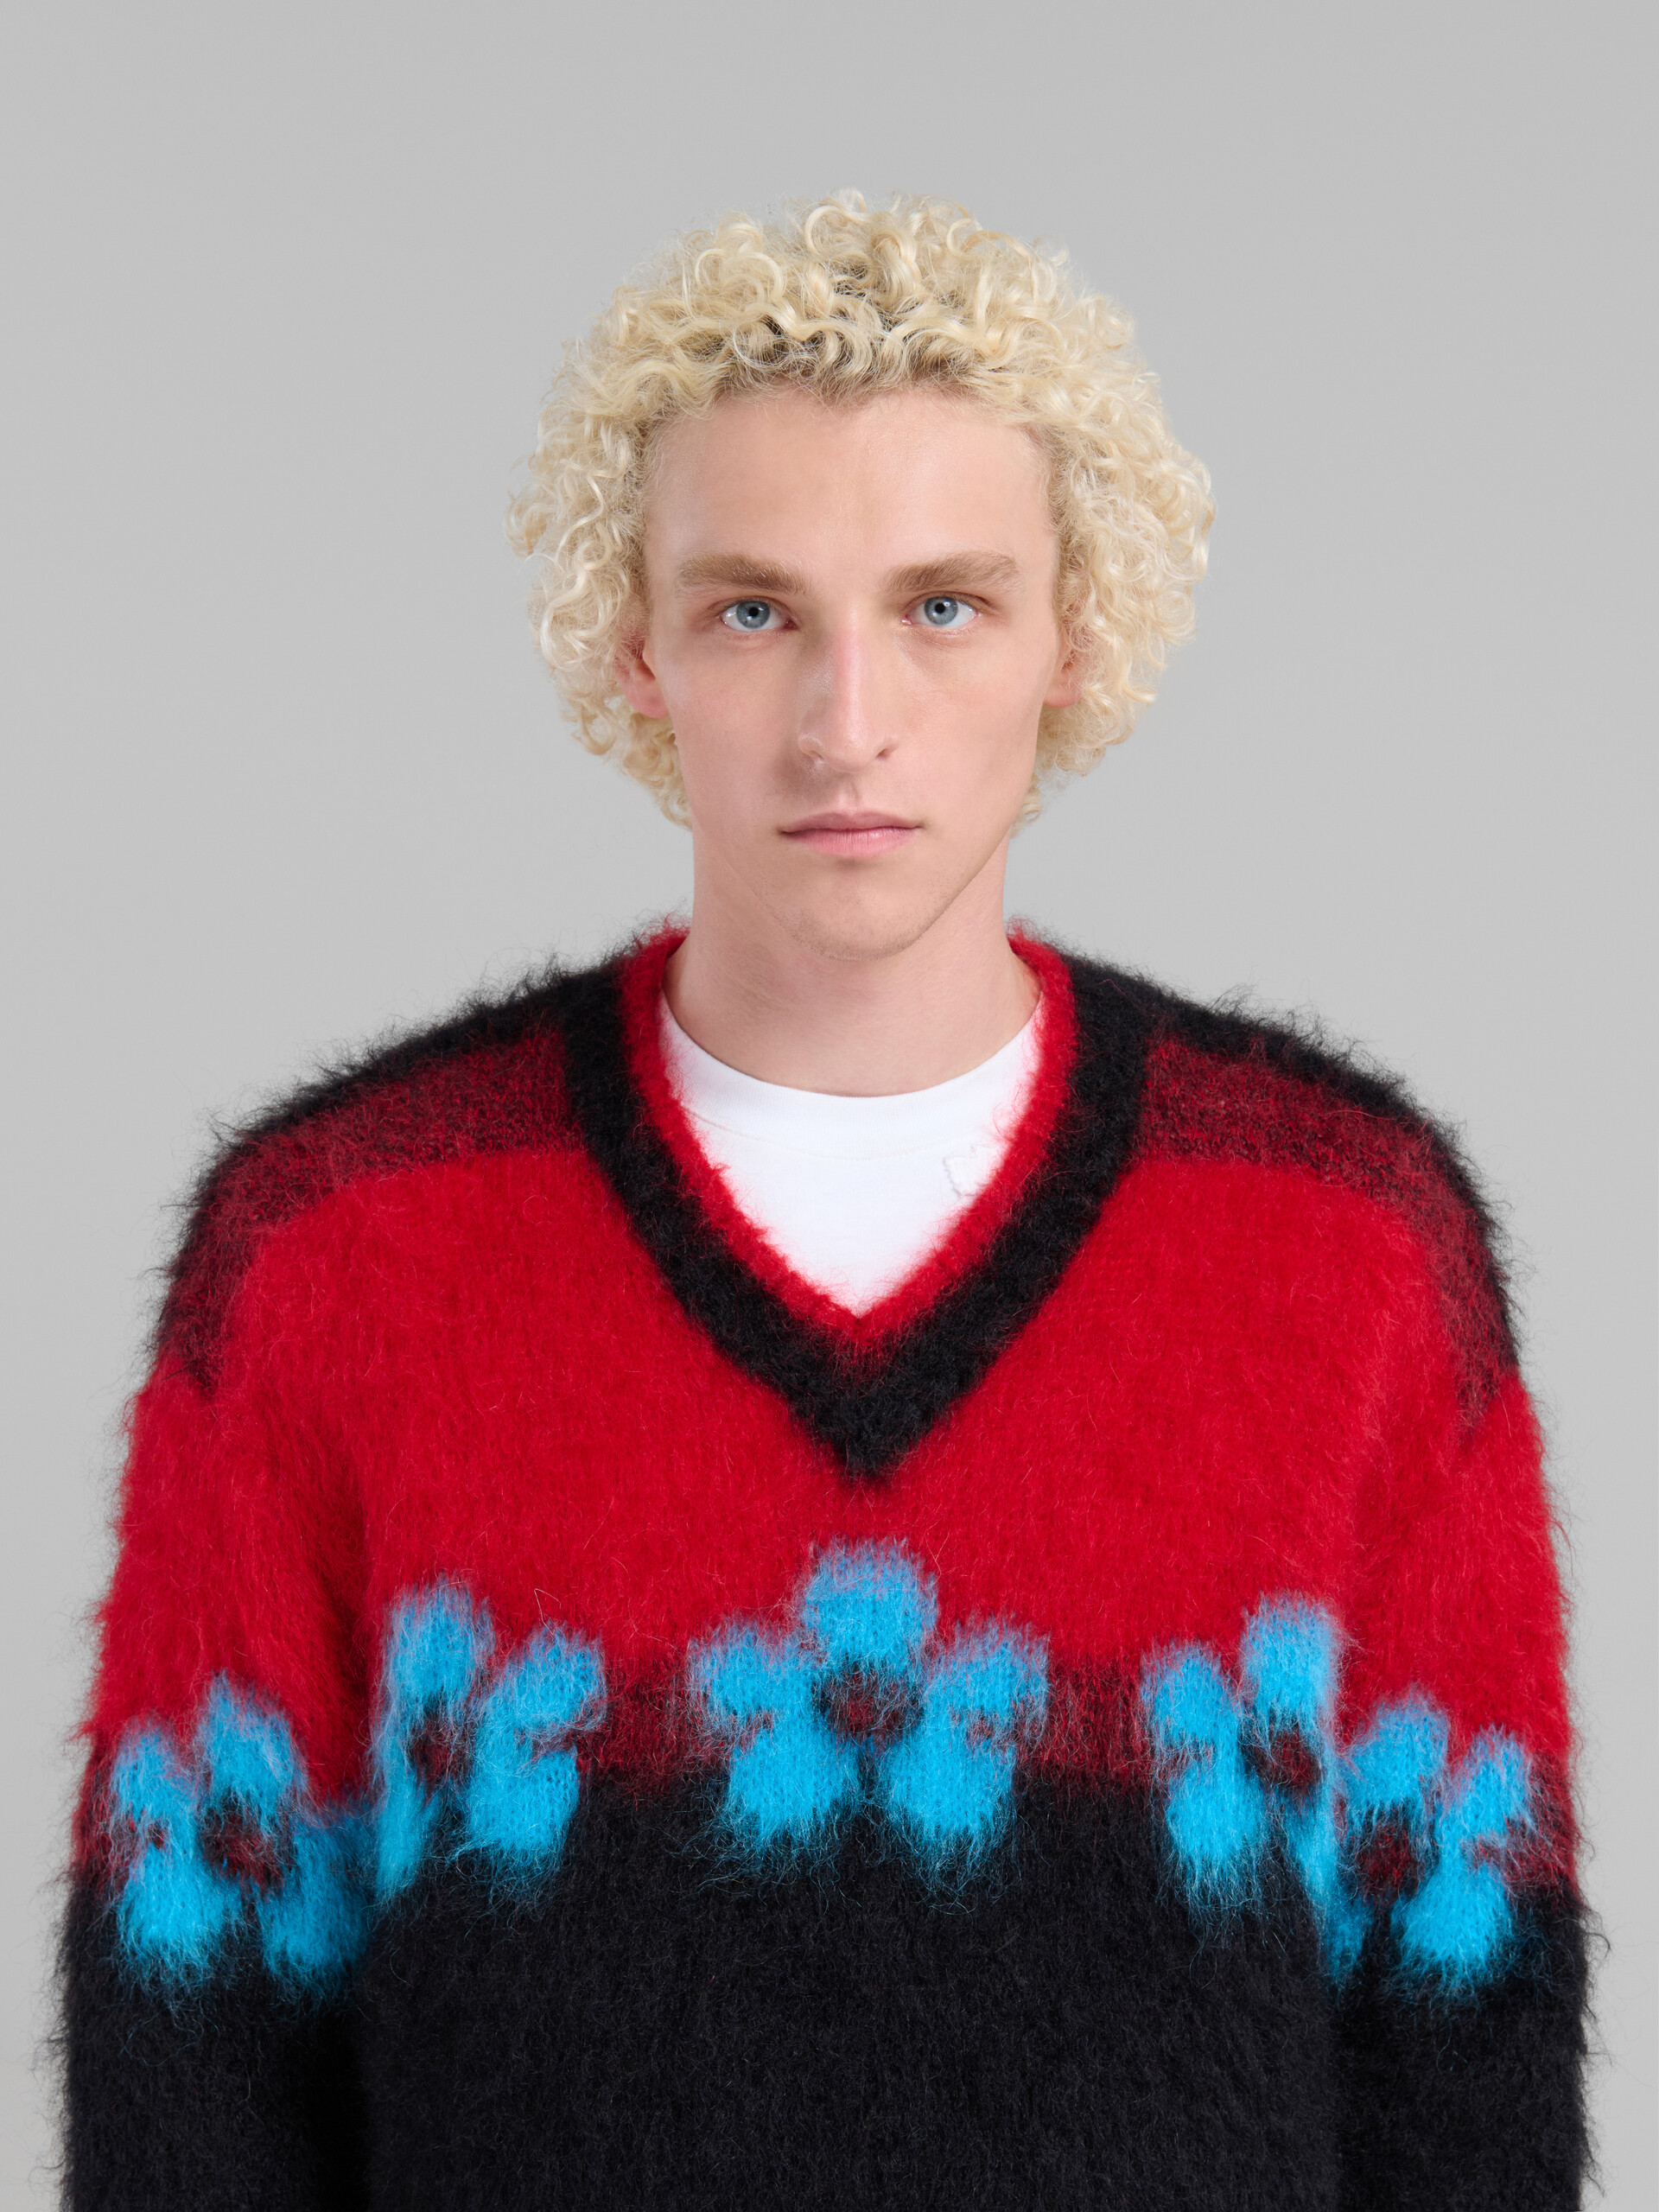 Black mohair jumper with flowers - Pullovers - Image 4